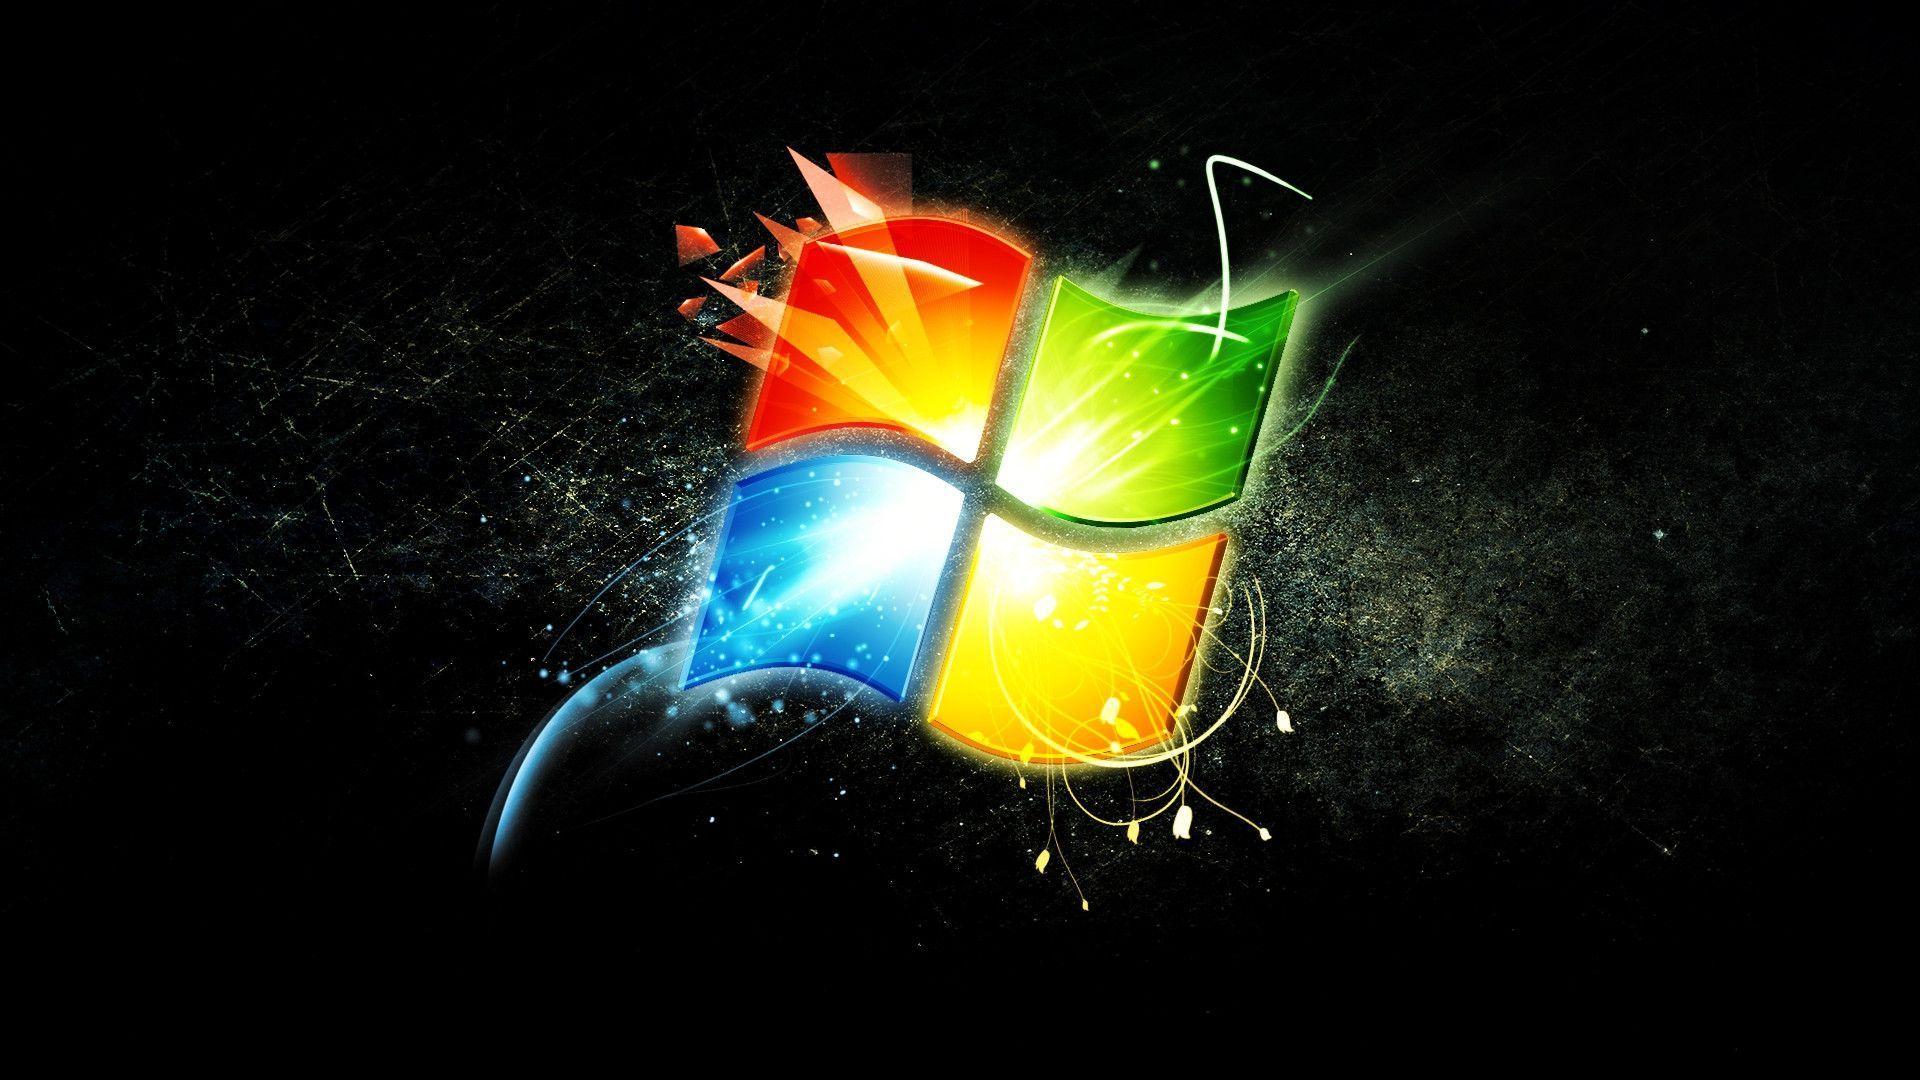 Amazing PC Games Wallpapers HD Of 2015 Windows 7 - Wallpaper Cave